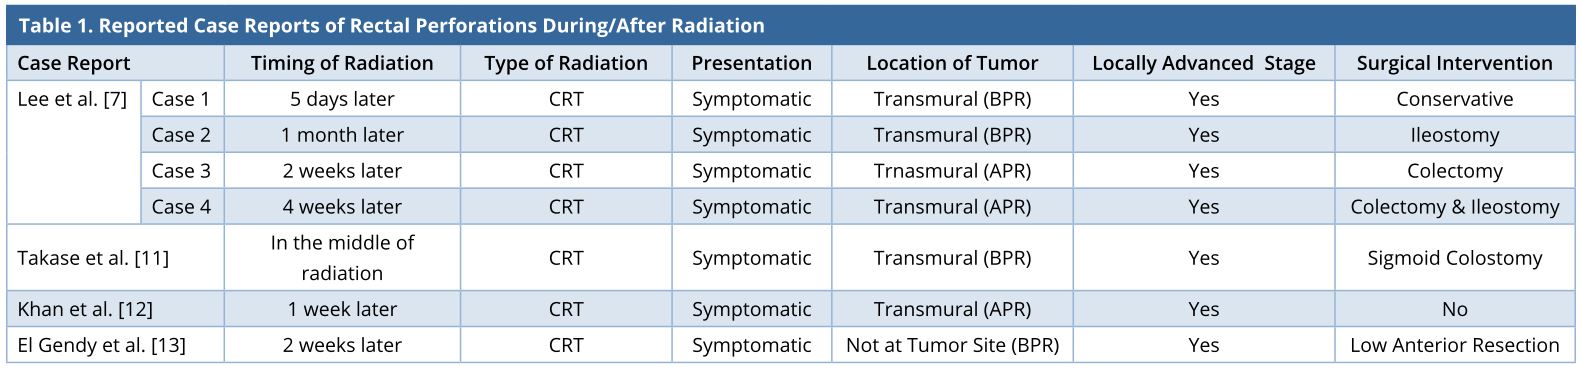 Table 1.JPGReported case reports of rectal perforations during/after radiation. <br><sup>APR, above peritoneal reflection; BPR, below peritoneal reflection; CRT, chemoradiation. </sup>